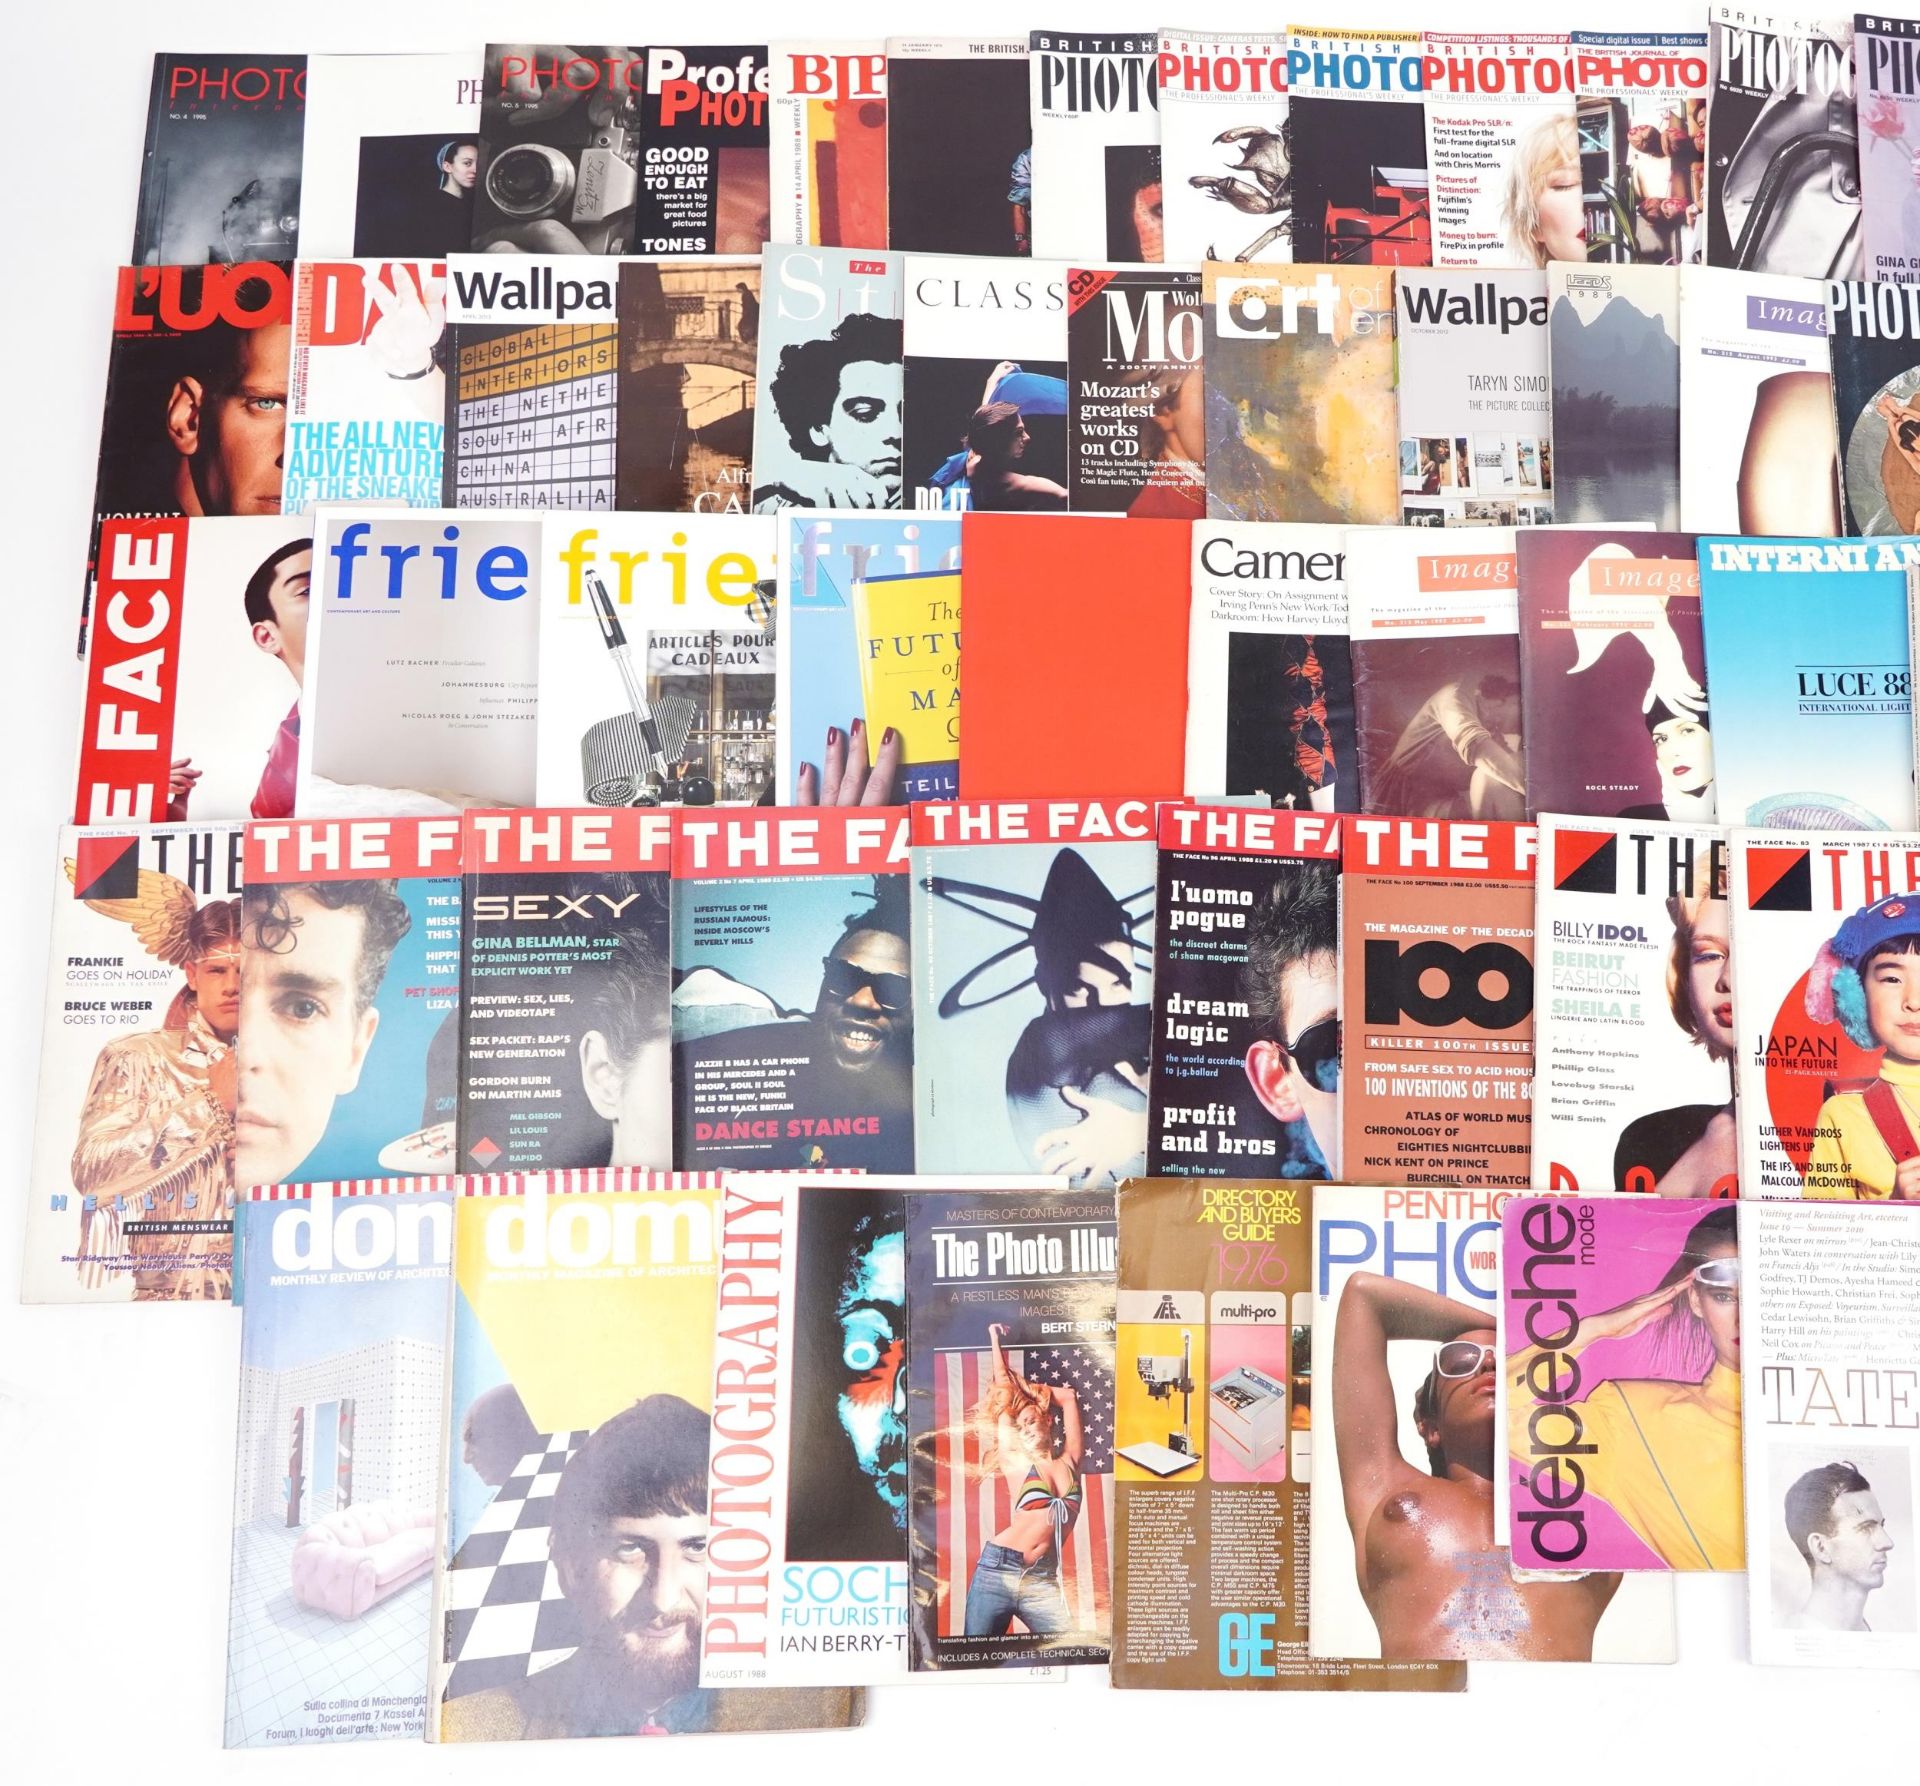 Large collection of vintage and later art photography magazines including Photo-Art, Professional - Image 2 of 3